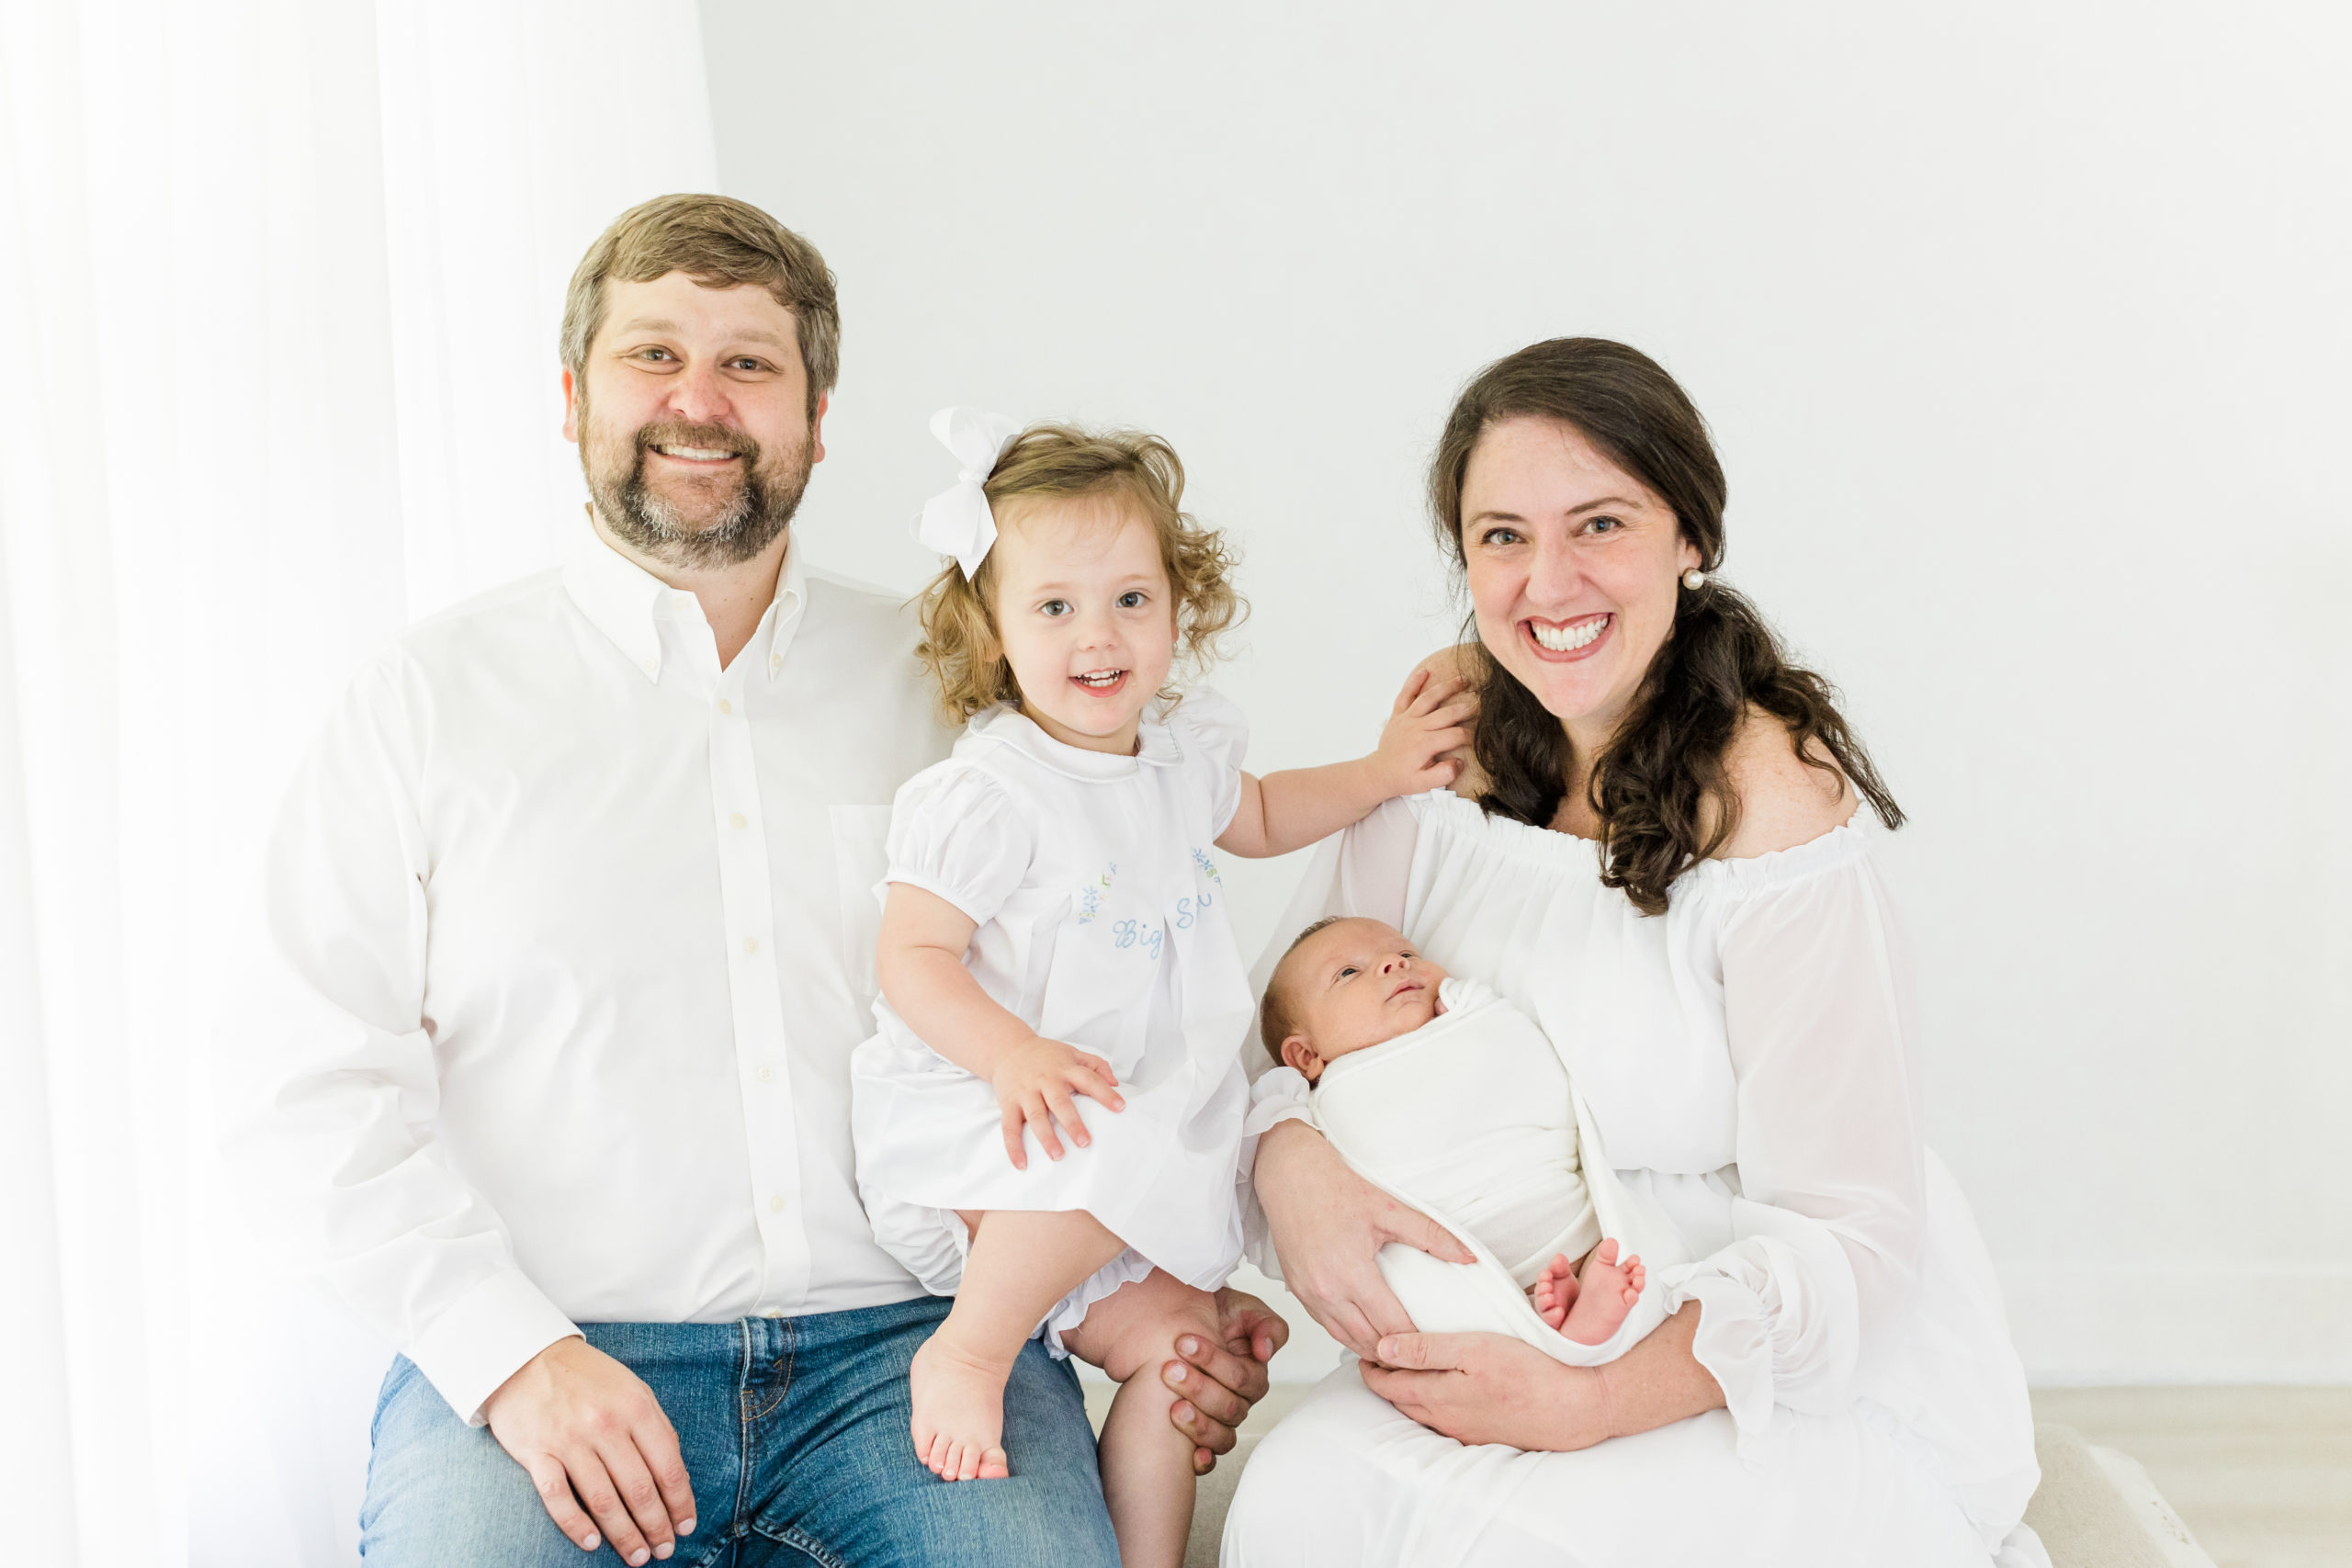 Posed in front of a natural light window in her photography studio, Houston, Texas photographer, Monette Anne Photography captures this family of four during their newborn photoshoot. newborn baby boy white swaddle white studio houston texas white color scheme family photos #HoustonTexasFamilyPhotographer #HoustonTexasNewbornPhotographer #HoustonTexasPhotographyStudio #MontroseTexasNewbornPhotographer #MontroseTexasFamilyPhotographer #MuseumDistrictTexasPhotographer #MuseumDistrictFamilyPhotographer #FamilyPhotoOutfits #StudioNewbornPhotos #MonetteAnnePhotography